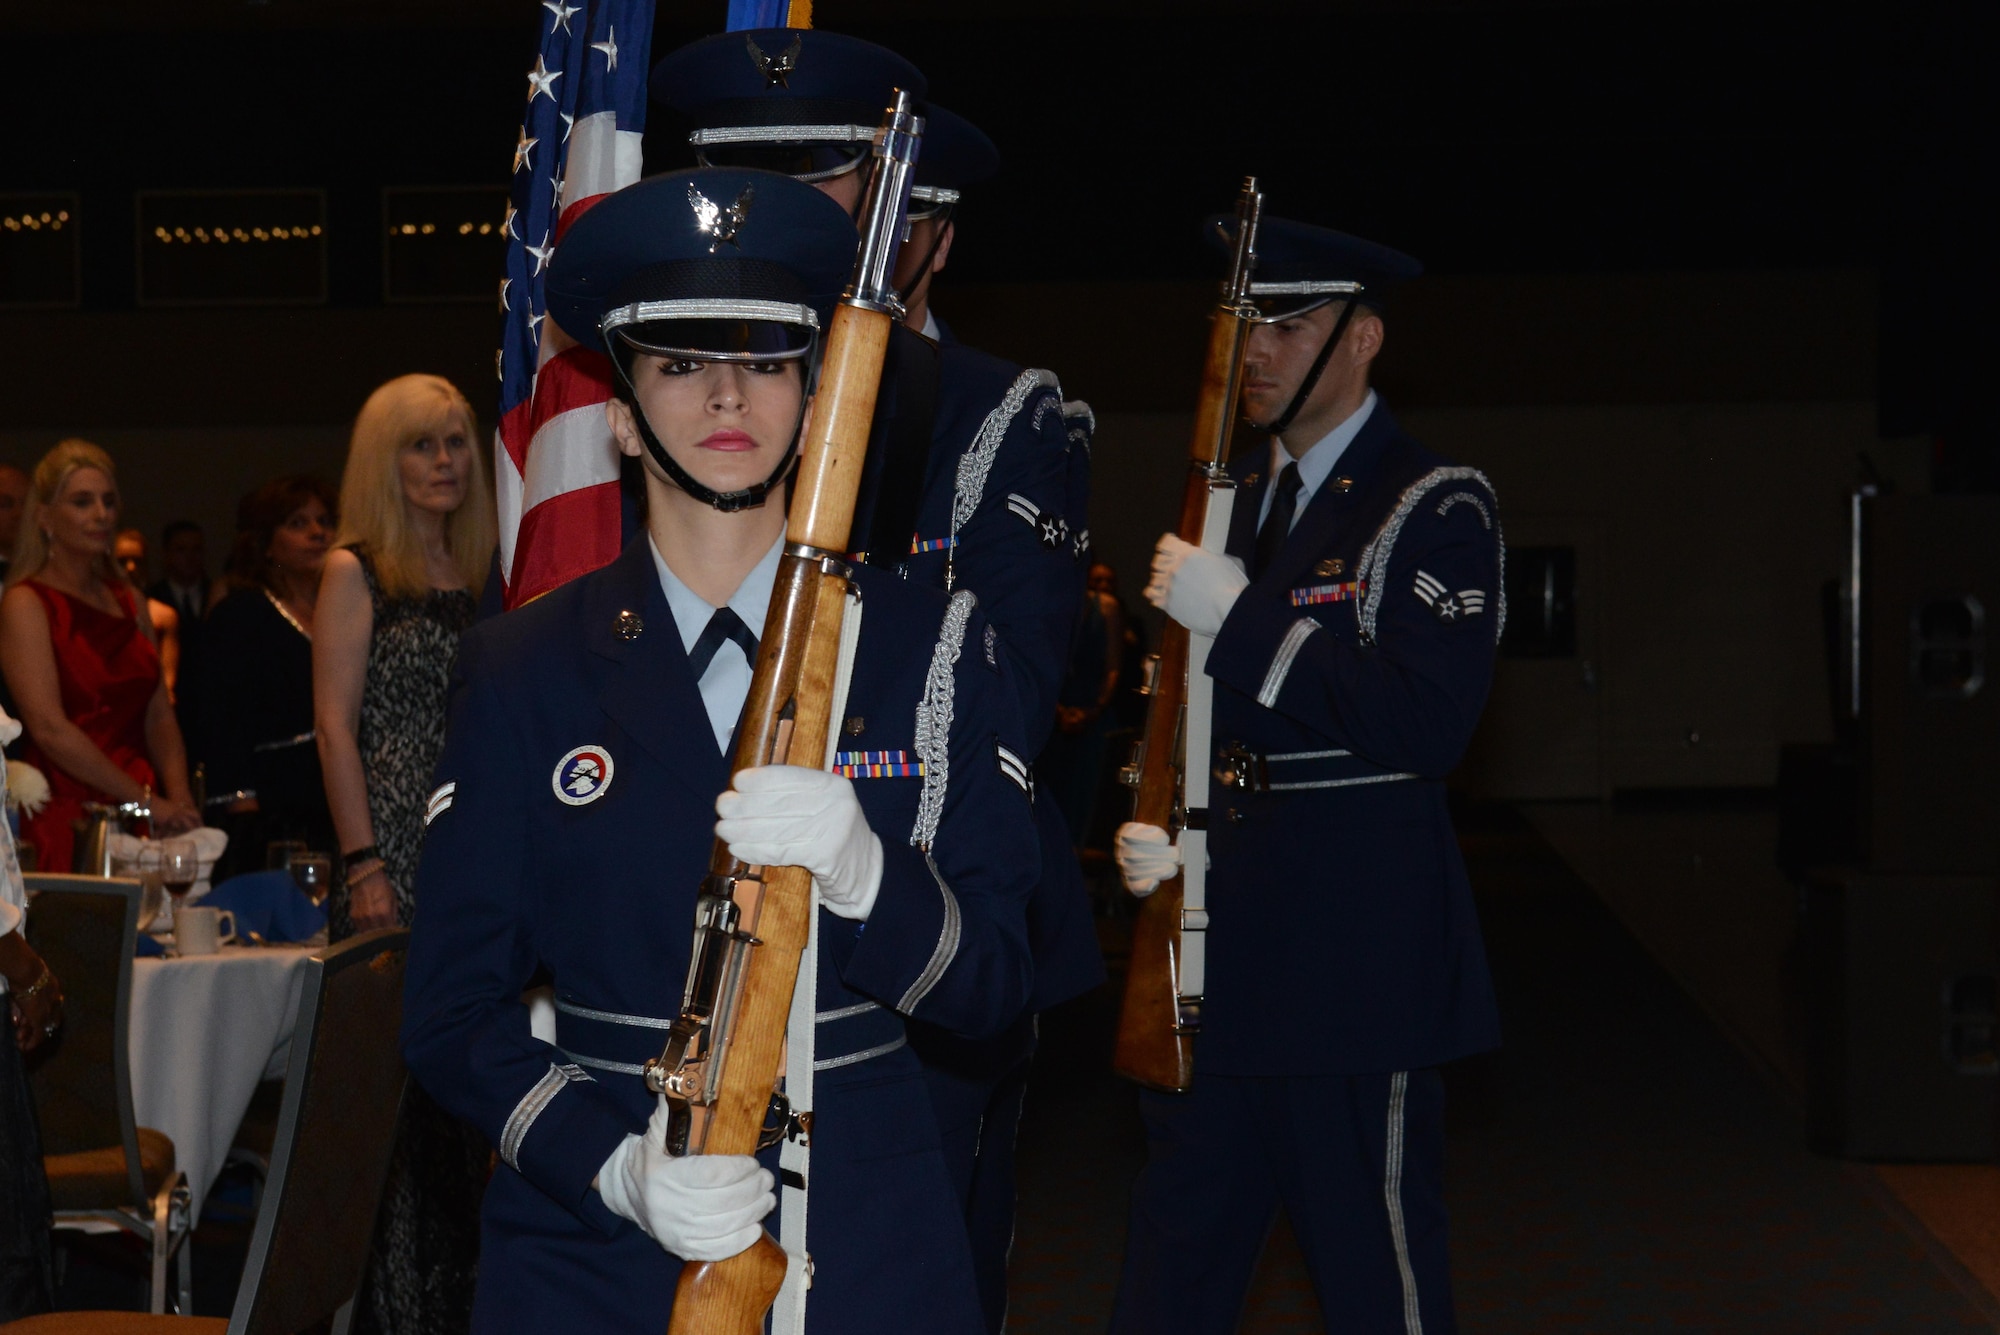 Airman 1st Class Tesla Saiz, Joint Base Elmendorf-Richardson honor guard, leads the Presentation of Colors during the 2016 Joint Base Elmendorf-Richardson Air Force Ball at the Anchorage Egan Center, Alaska, Sept. 24, 2016. This event marked the Air Force’s 69th birthday celebrating the Air Force’s heritage through reflection, ceremony and camaraderie.